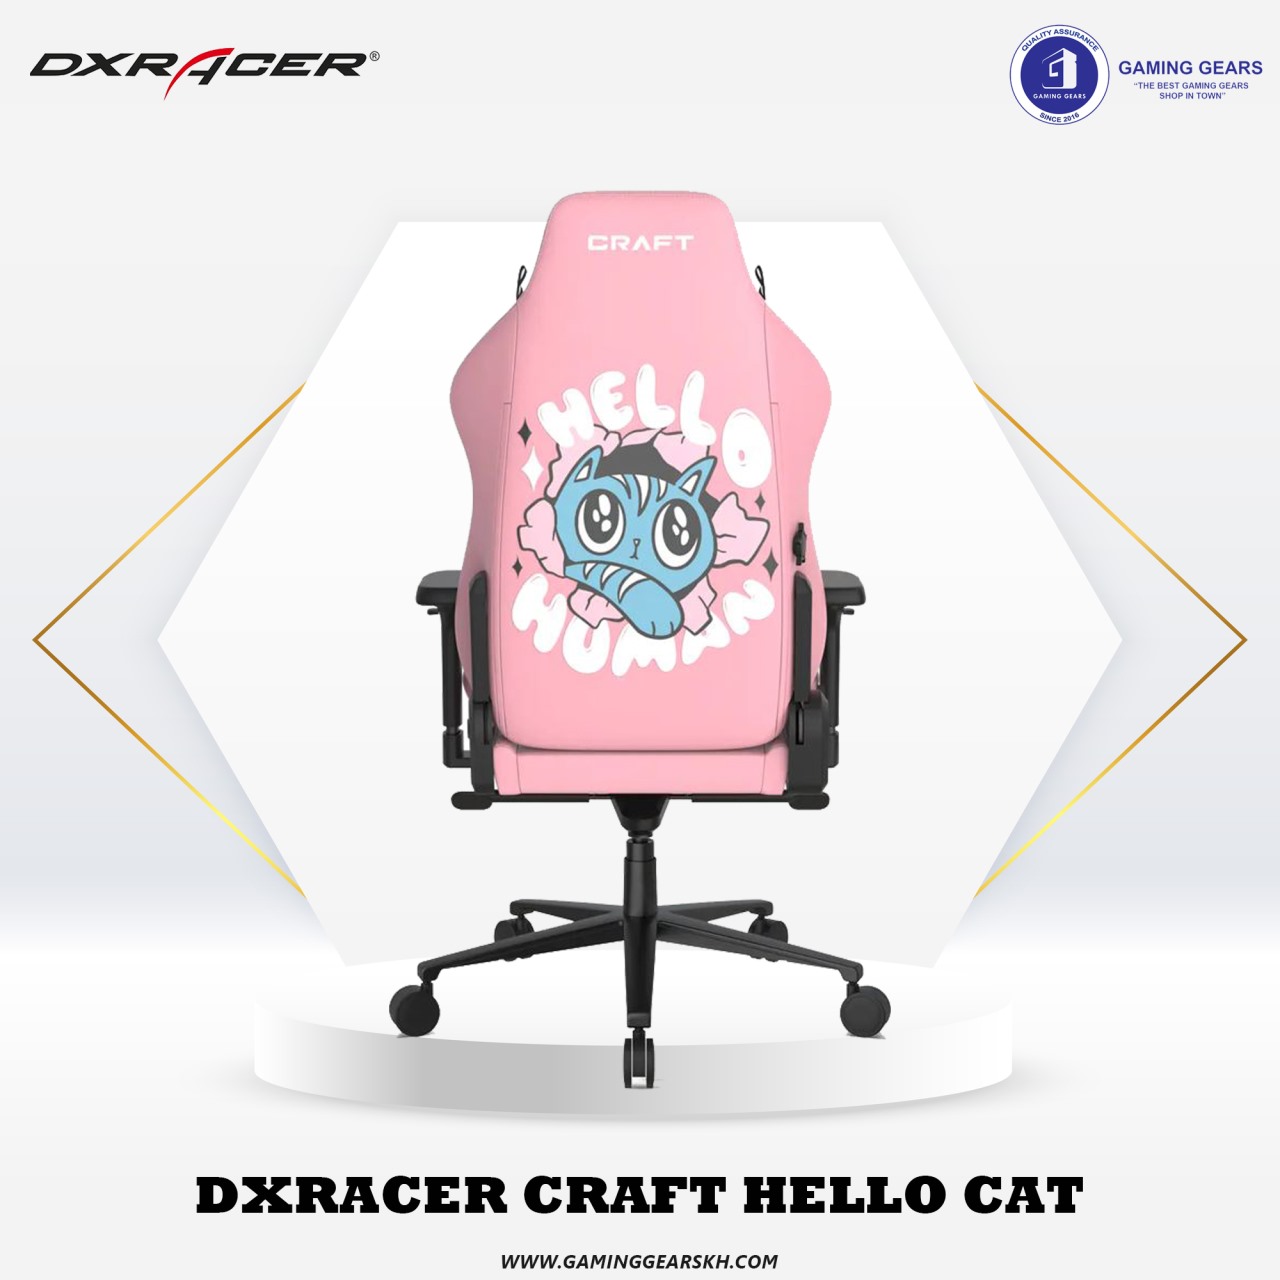 DXRacer Craft Custom Gaming Chair Special Edition Office Chair - Hello Human Cat